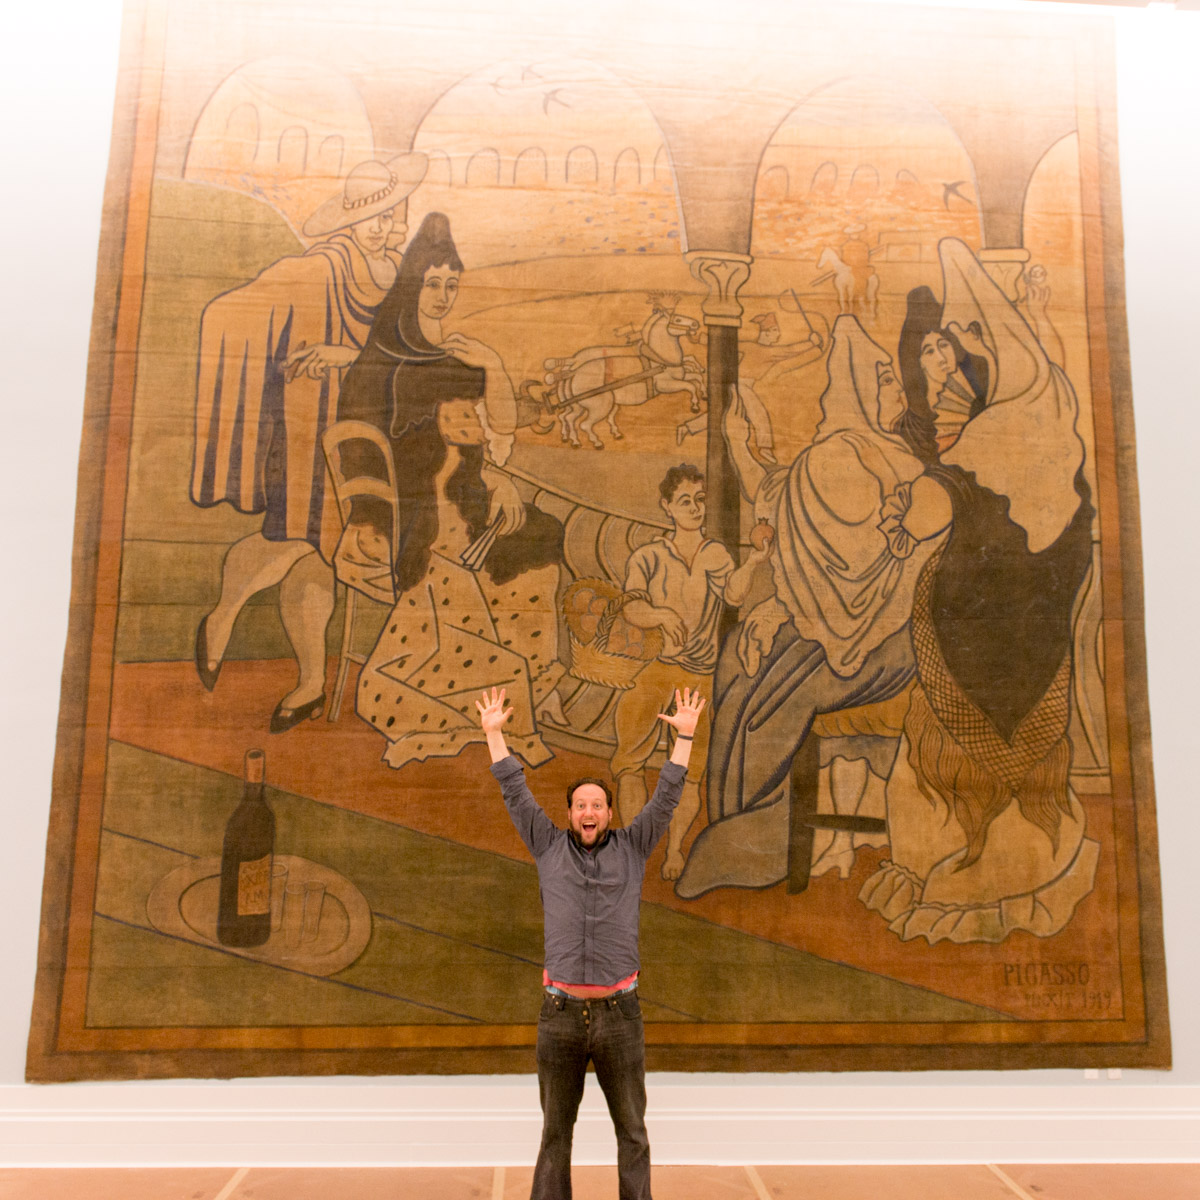 Jason gardner in front of the Le Tricorne curtain by picasso